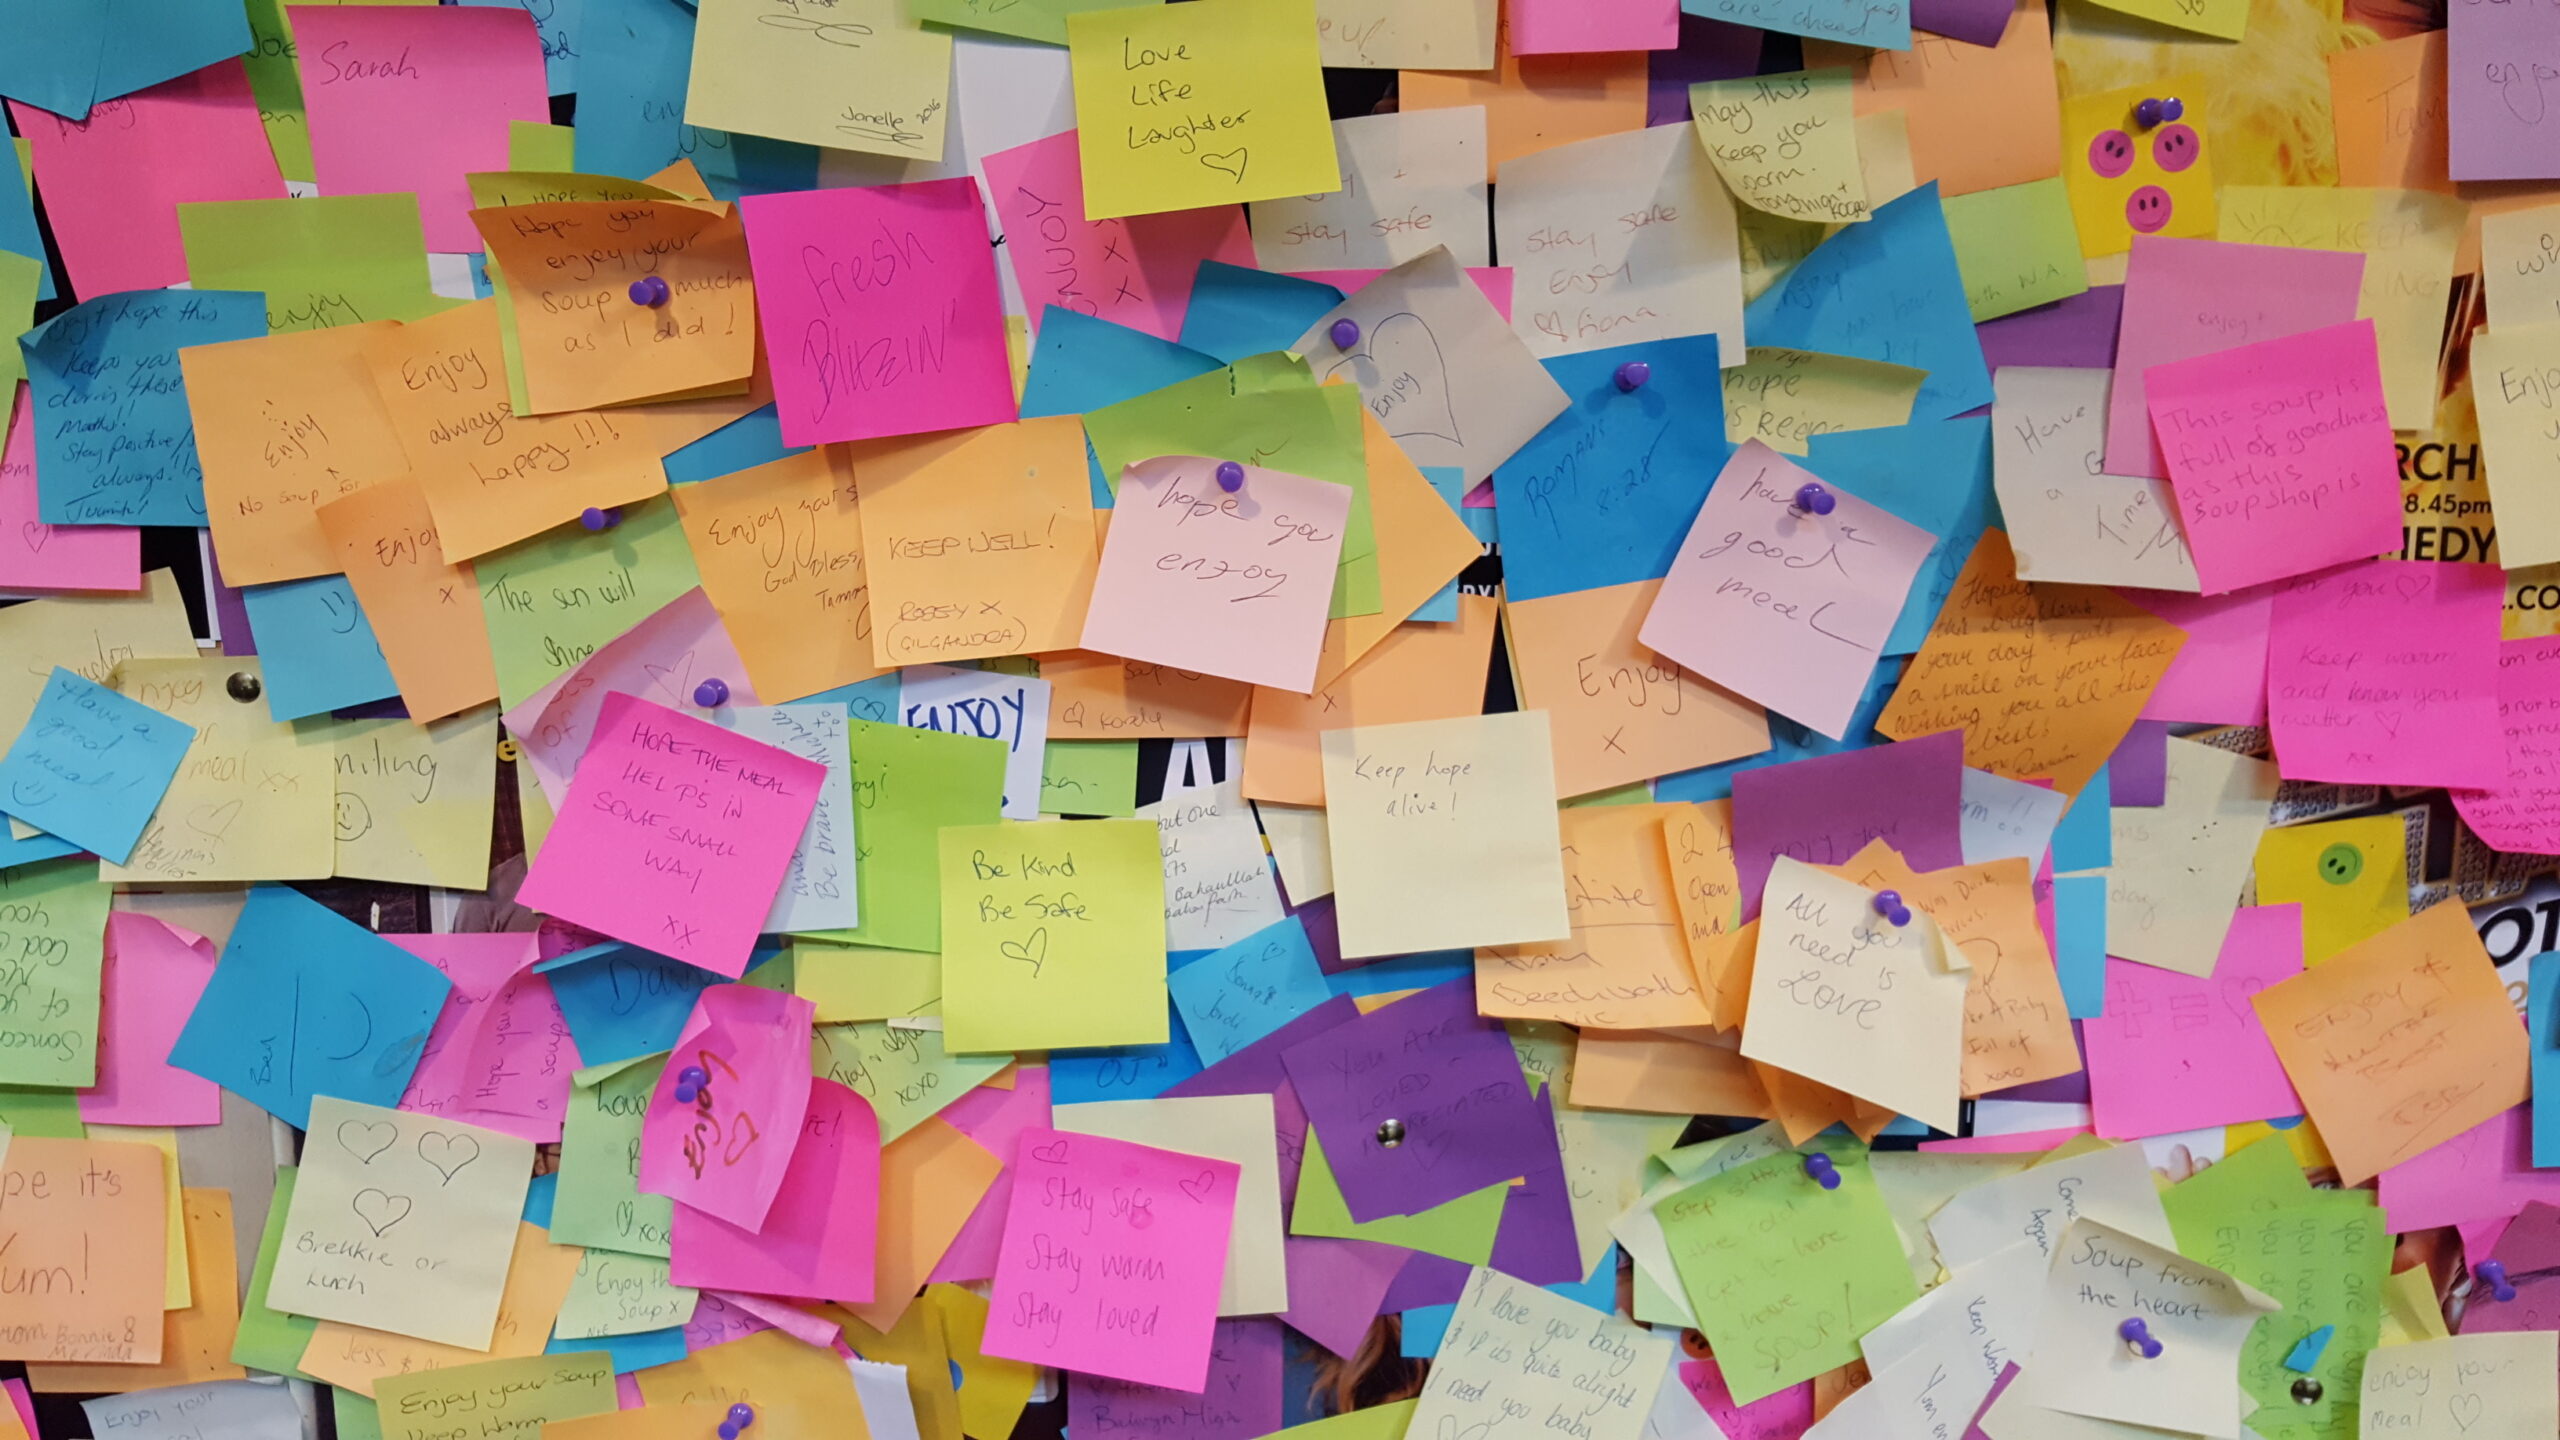 Photograph of colorful but messy post-its on a wall